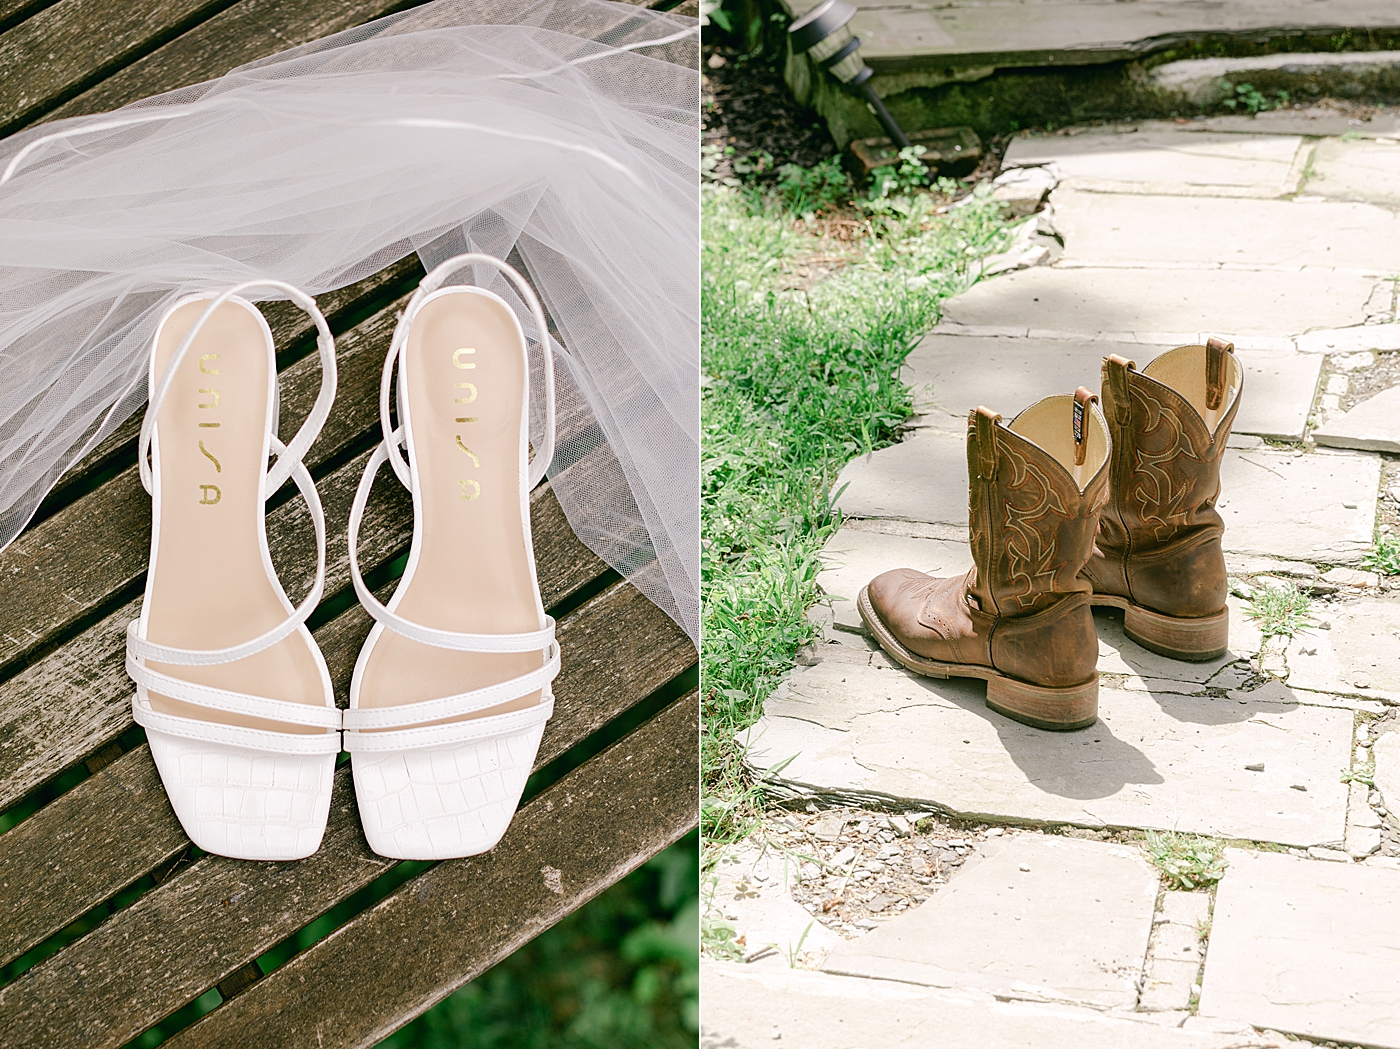 Bride and groom wedding shoes | Image by Hope Helmuth Photography